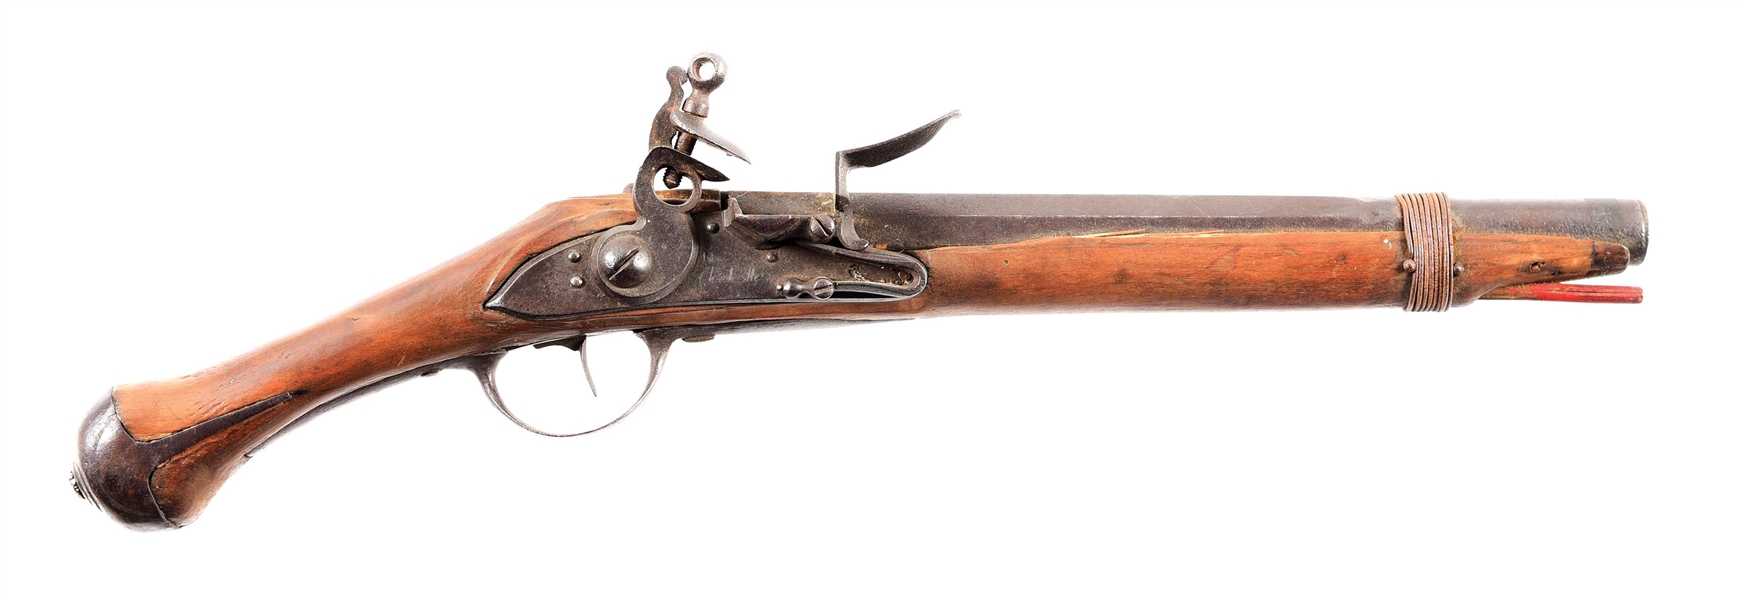 (A) MASSIVE AMERICAN ASSEMBLED FLINTLOCK PISTOL USING FRENCH CHARLEVILLE PARTS.